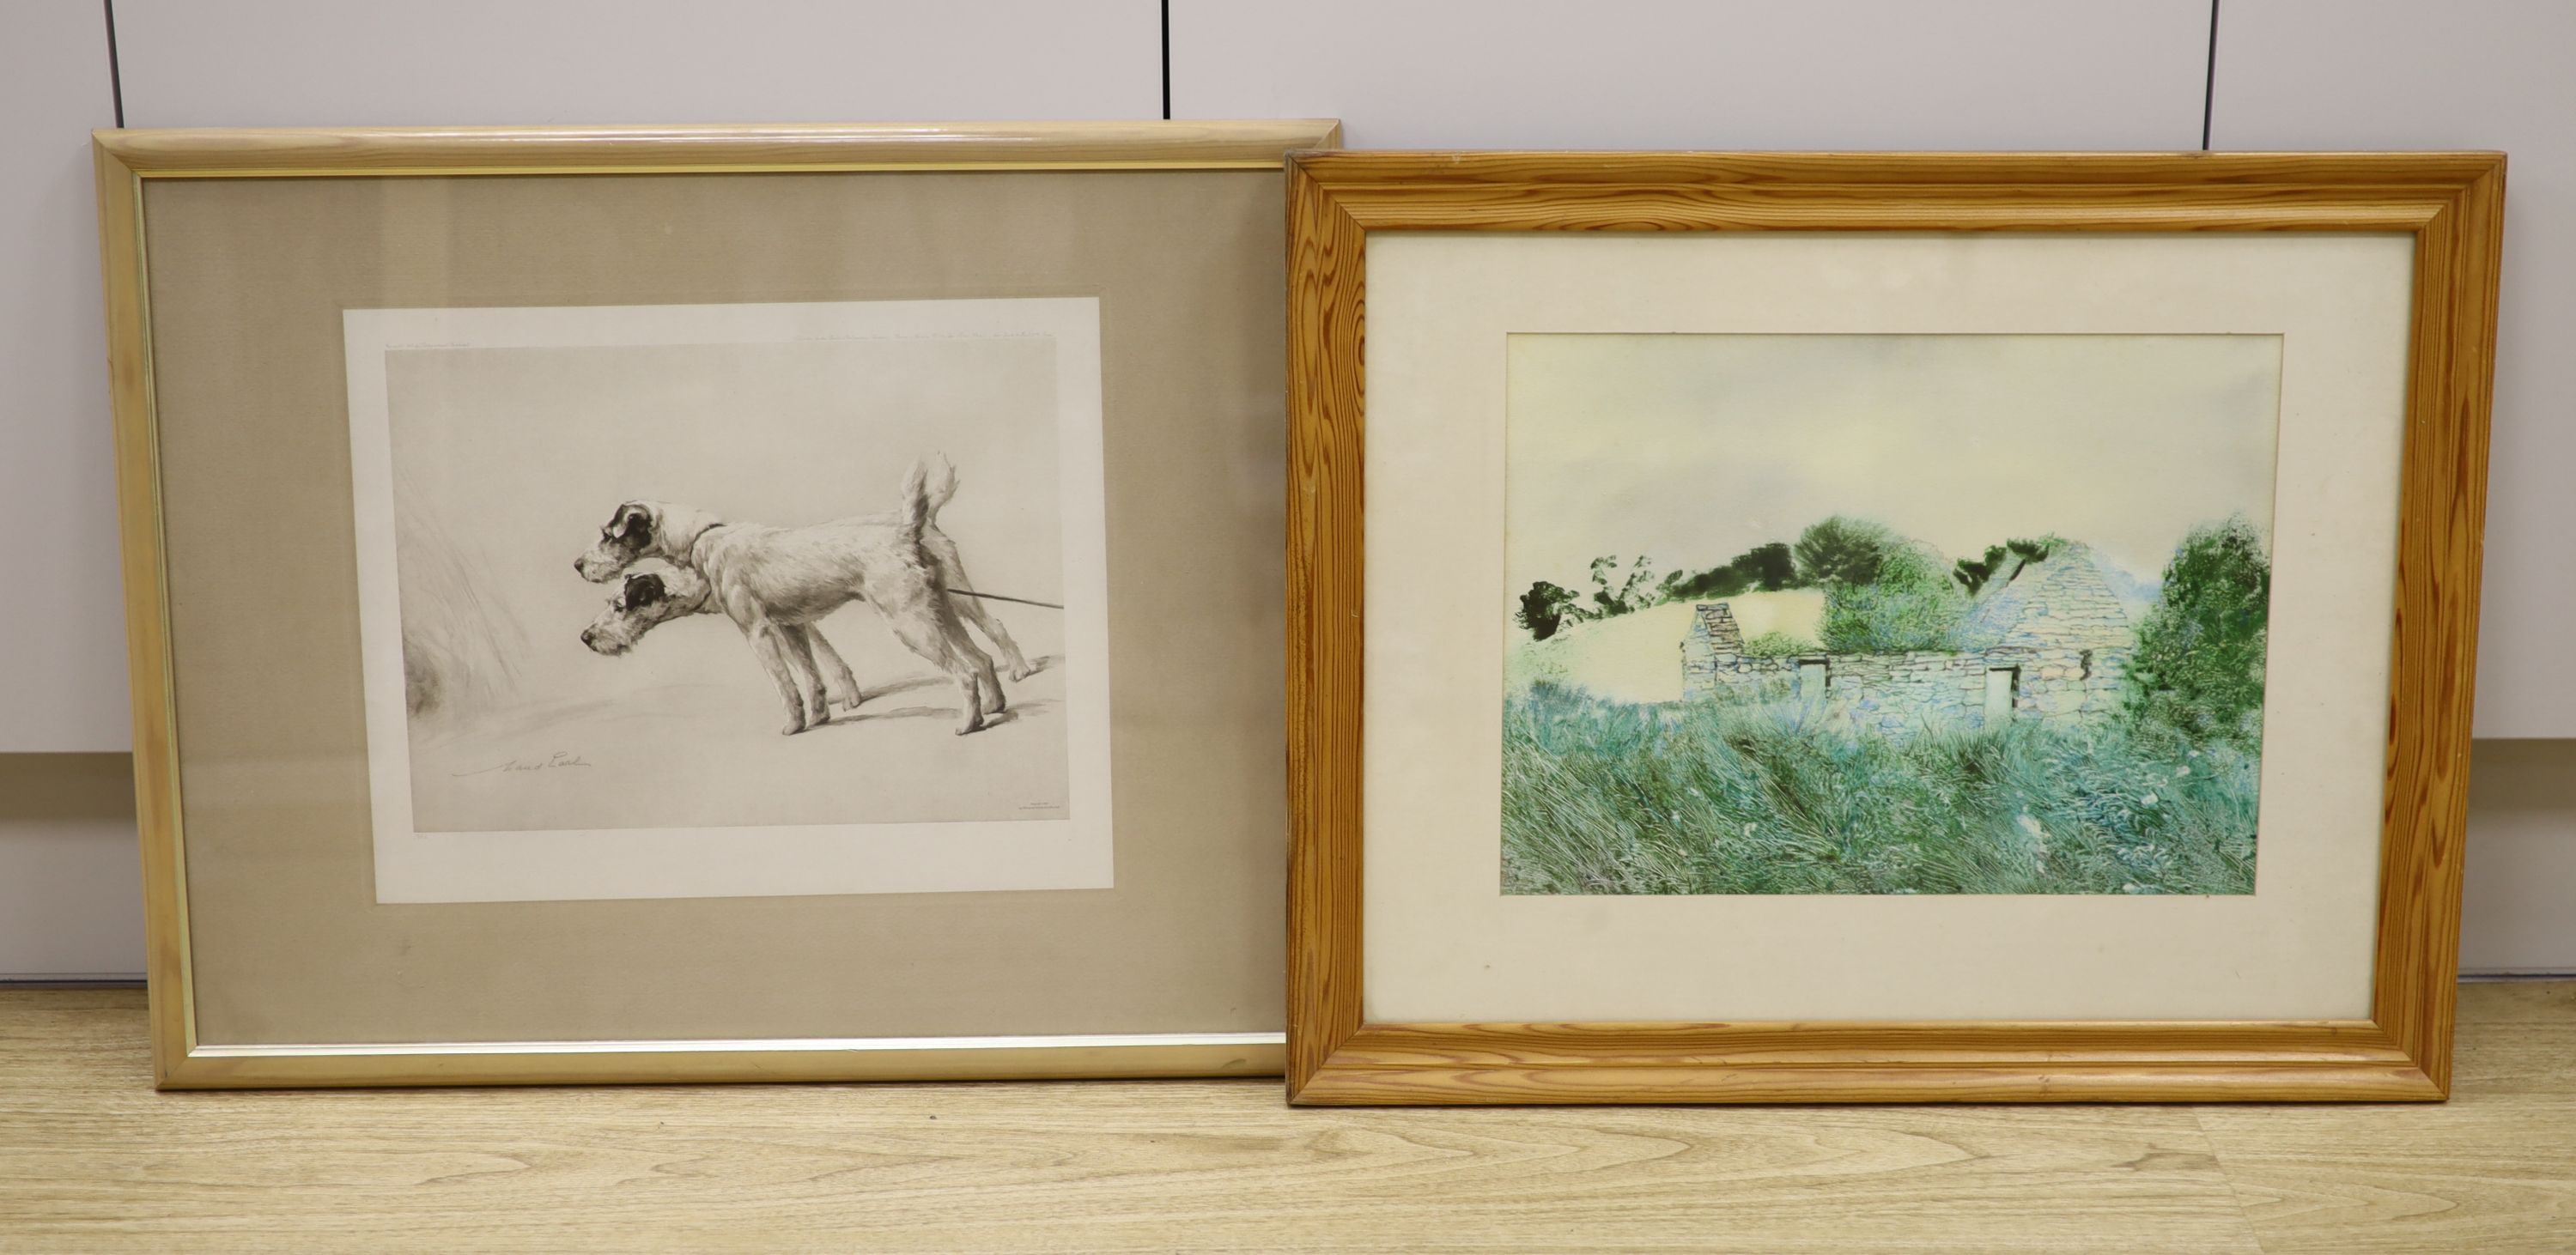 Philip Crenell, mixed media, Ruin at Drummonread, 28 x 37cm, and a Maud Earl print of terriers